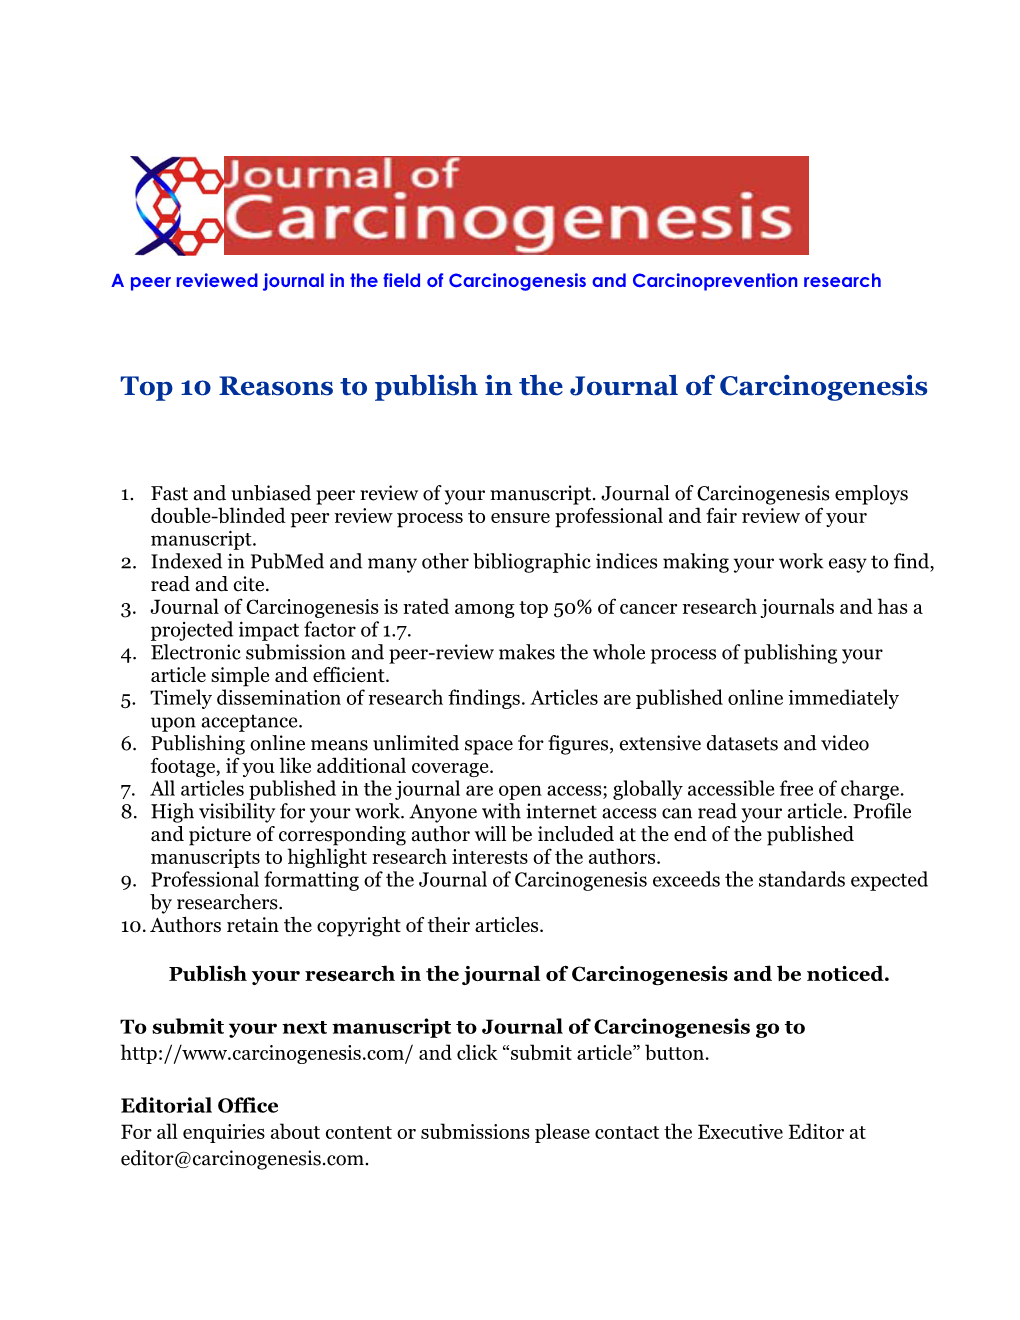 Top 10 Reasons to Publish in the Journal of Carcinogenesis